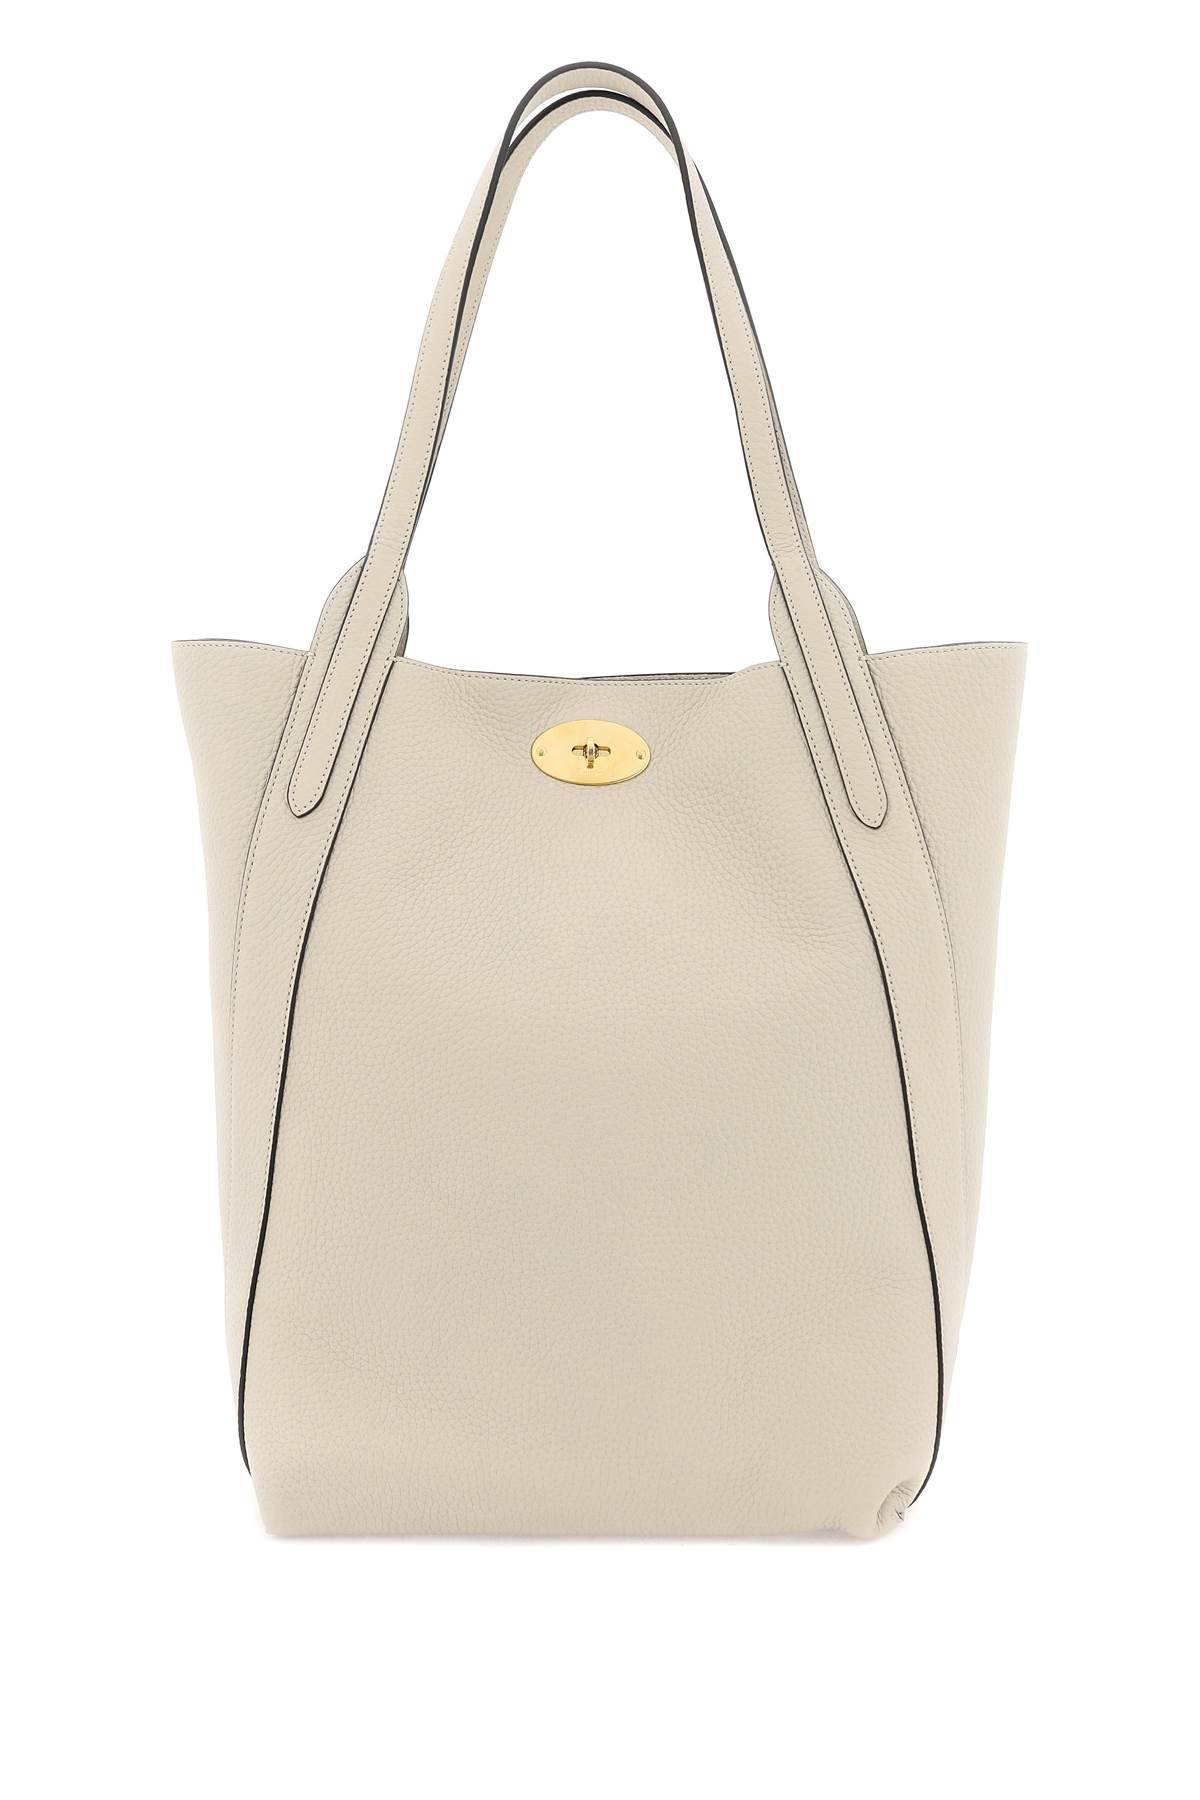 Mulberry MULBERRY grained leather bayswater tote bag